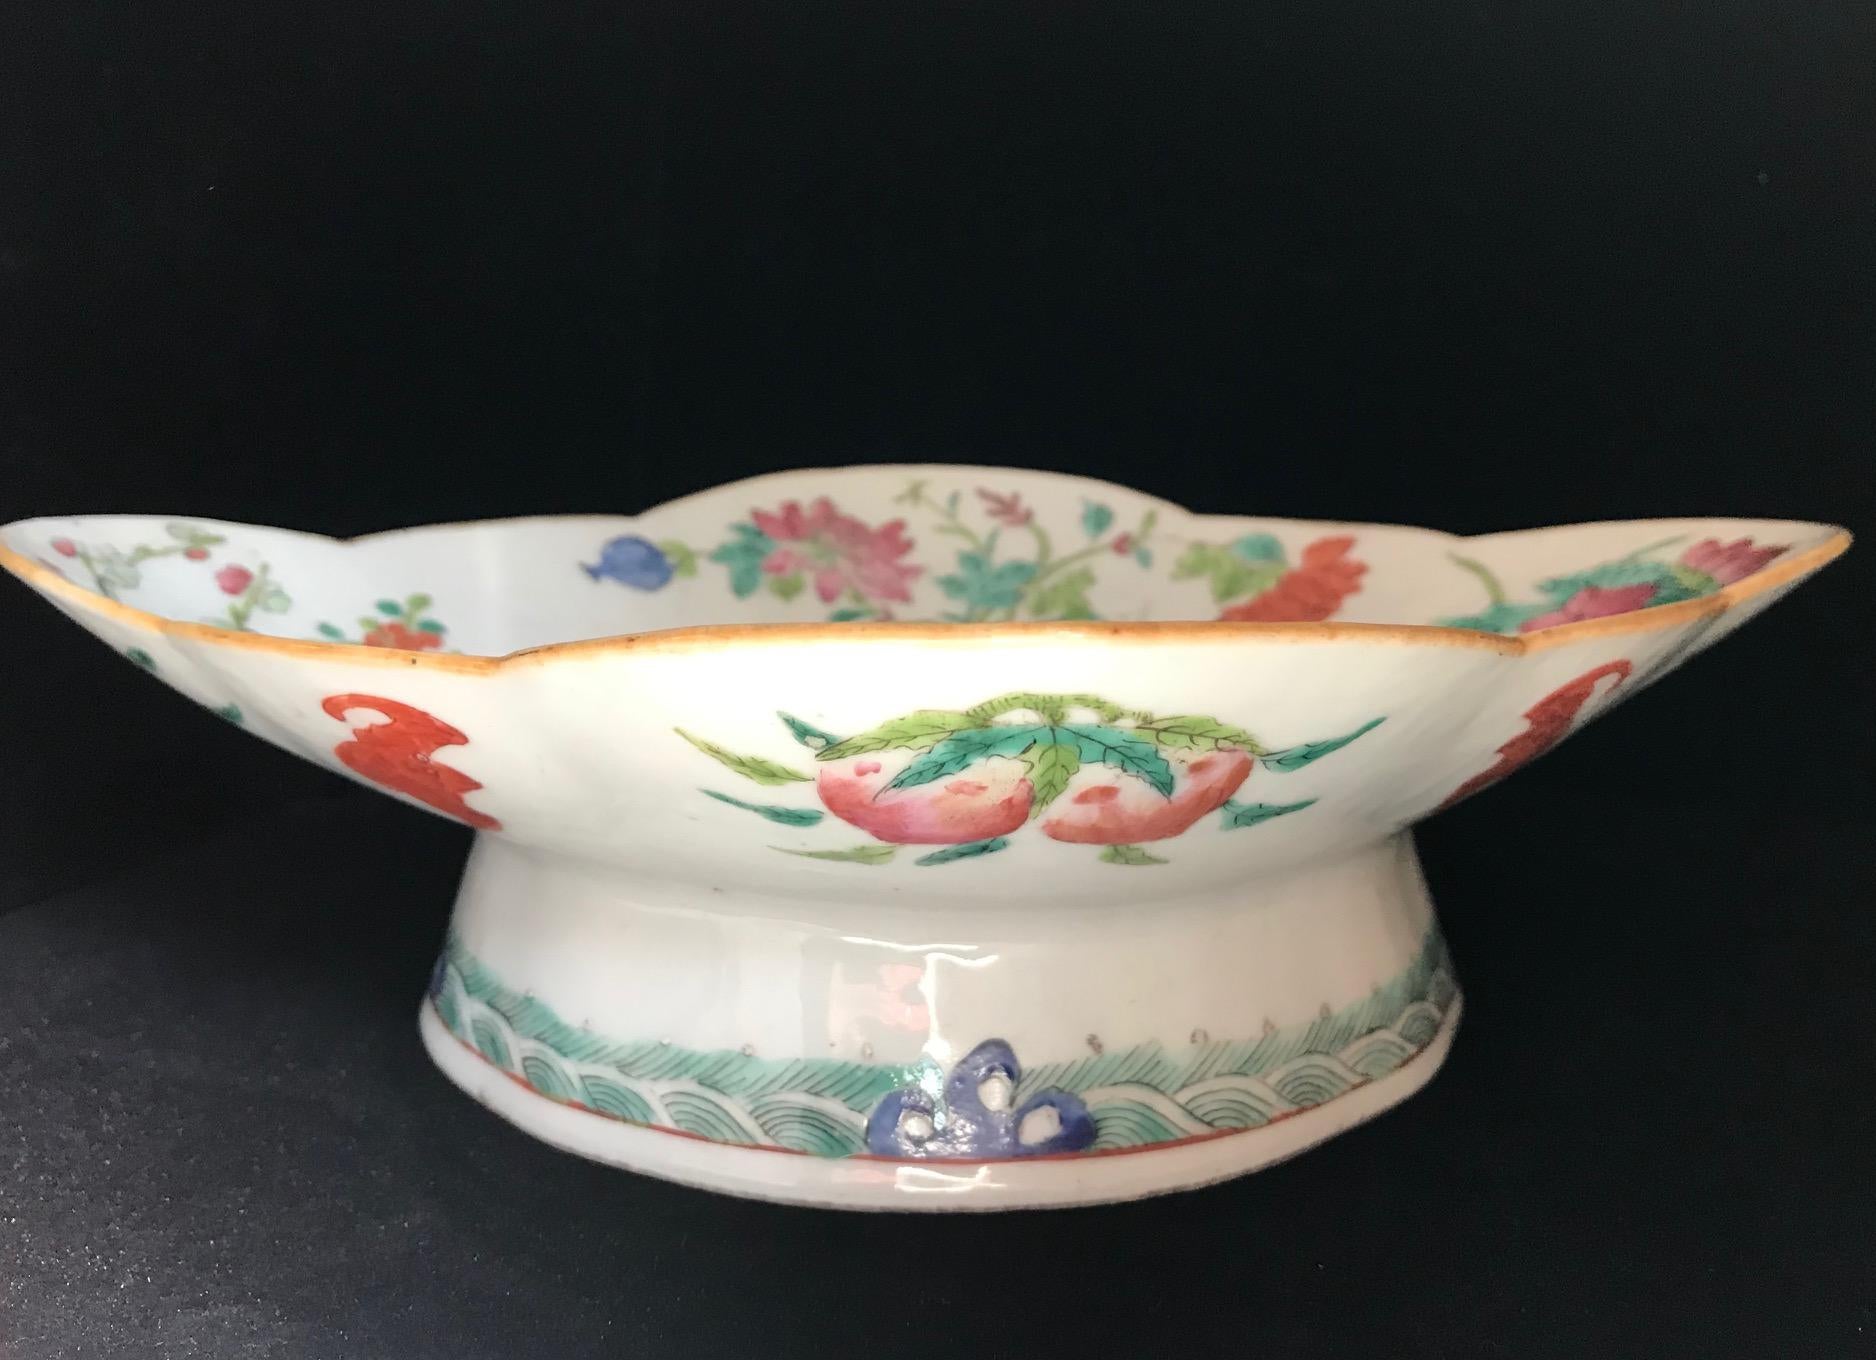 Chinese Export 19th Century Chinese Famille Rose “Wu Shuang Pu“ Pedestal Bowl, Qing Dynasty